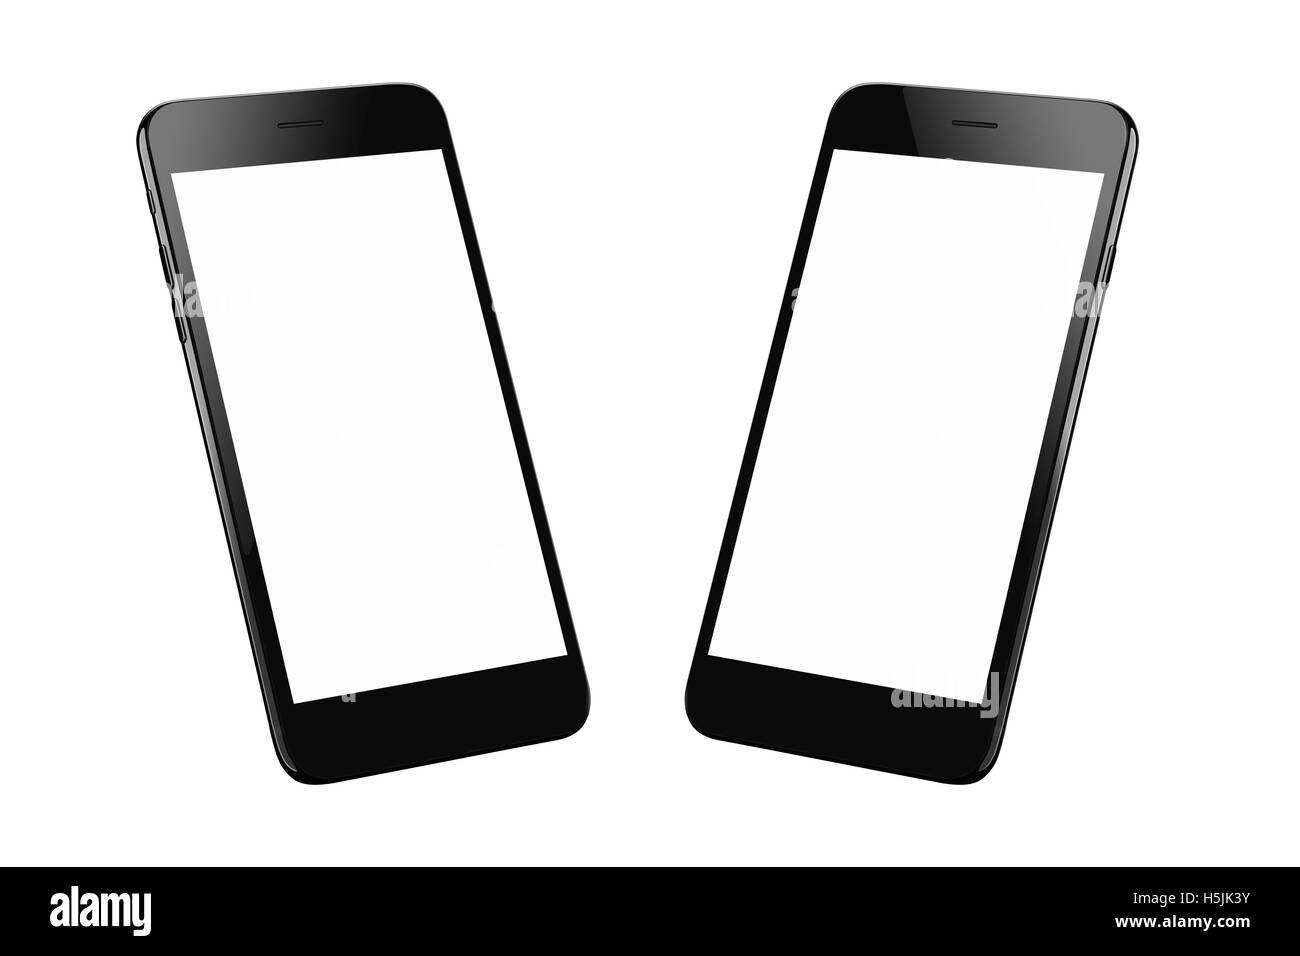 Black modern smart phone isolated. Two isometric positions. Blank screen for mockup. Stock Photo